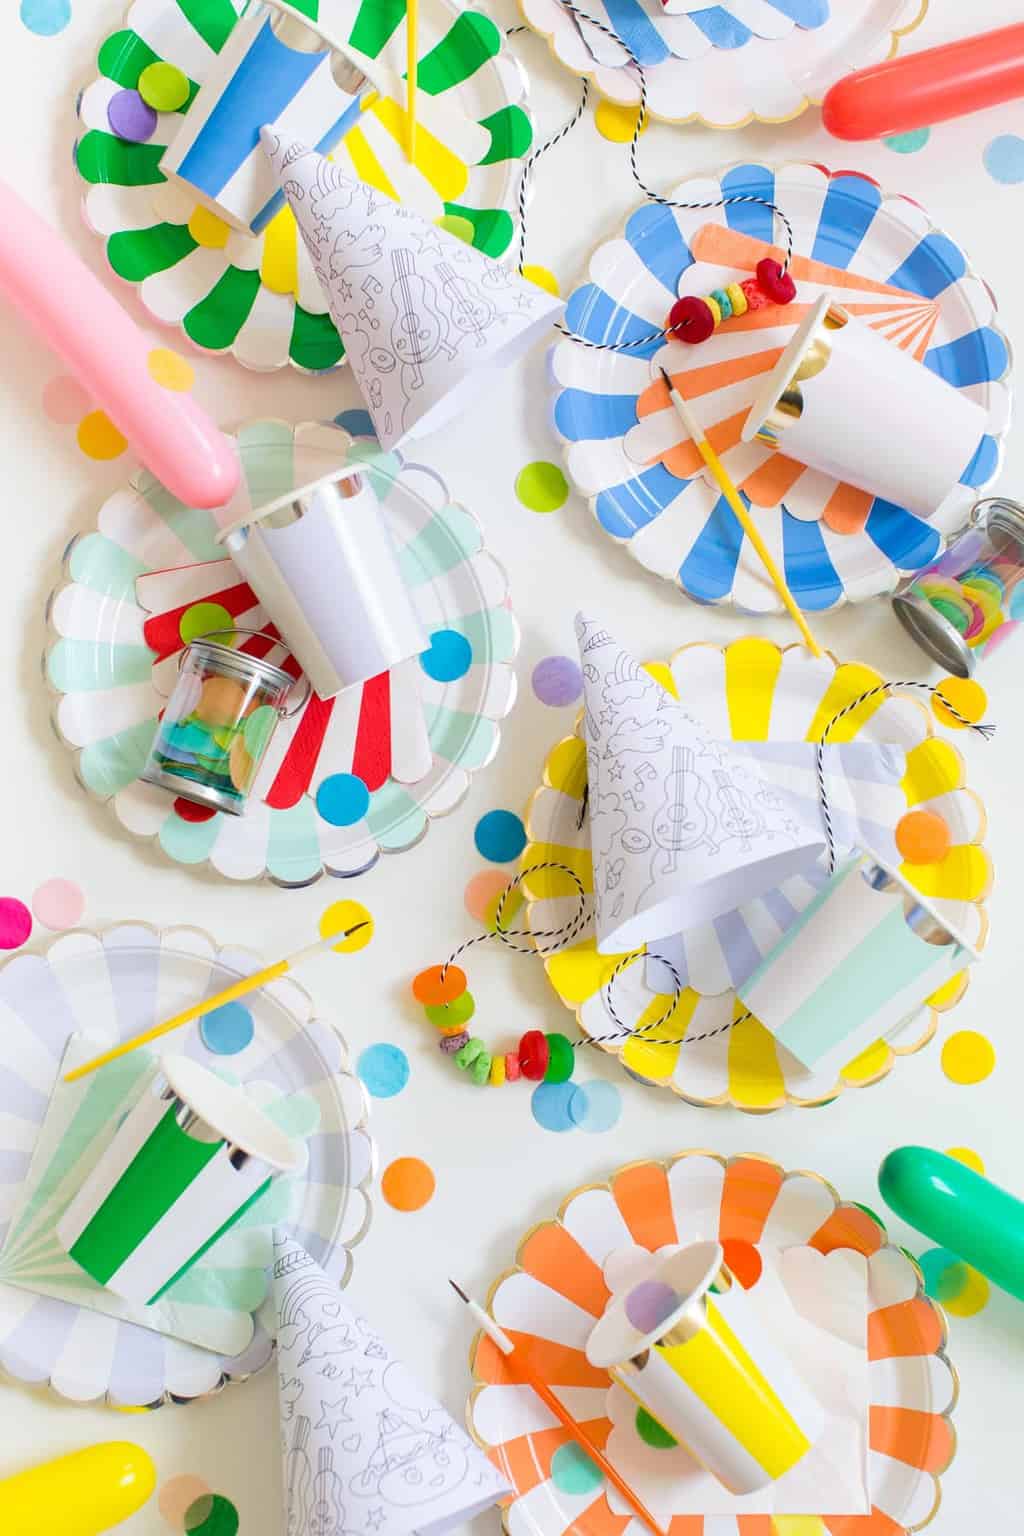 The Birthday Party Project + How To Throw A Kids Art Party! by top Houston lifestyle blogger Ashley Rose of Sugar & Cloth